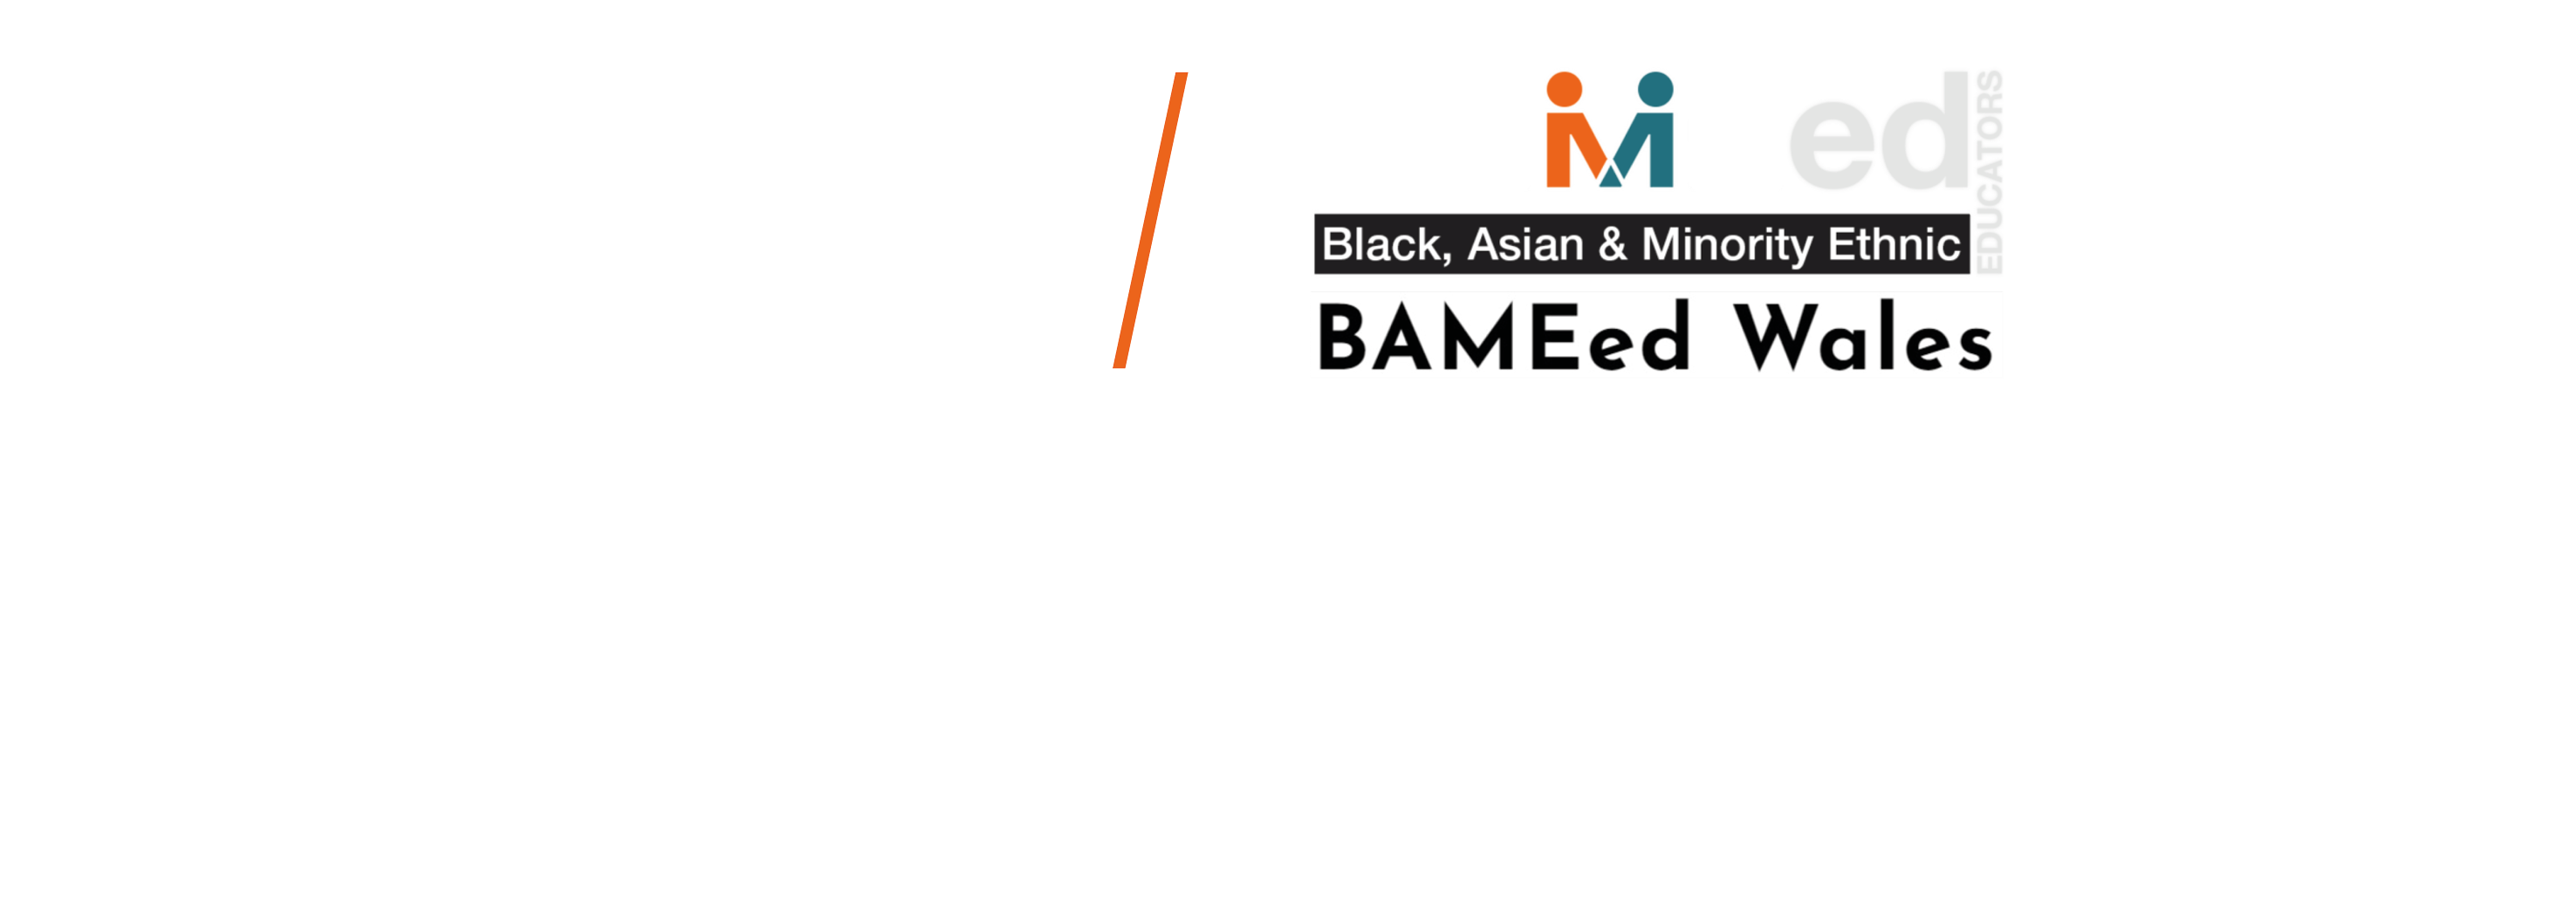 Anti-Racist Film Competition